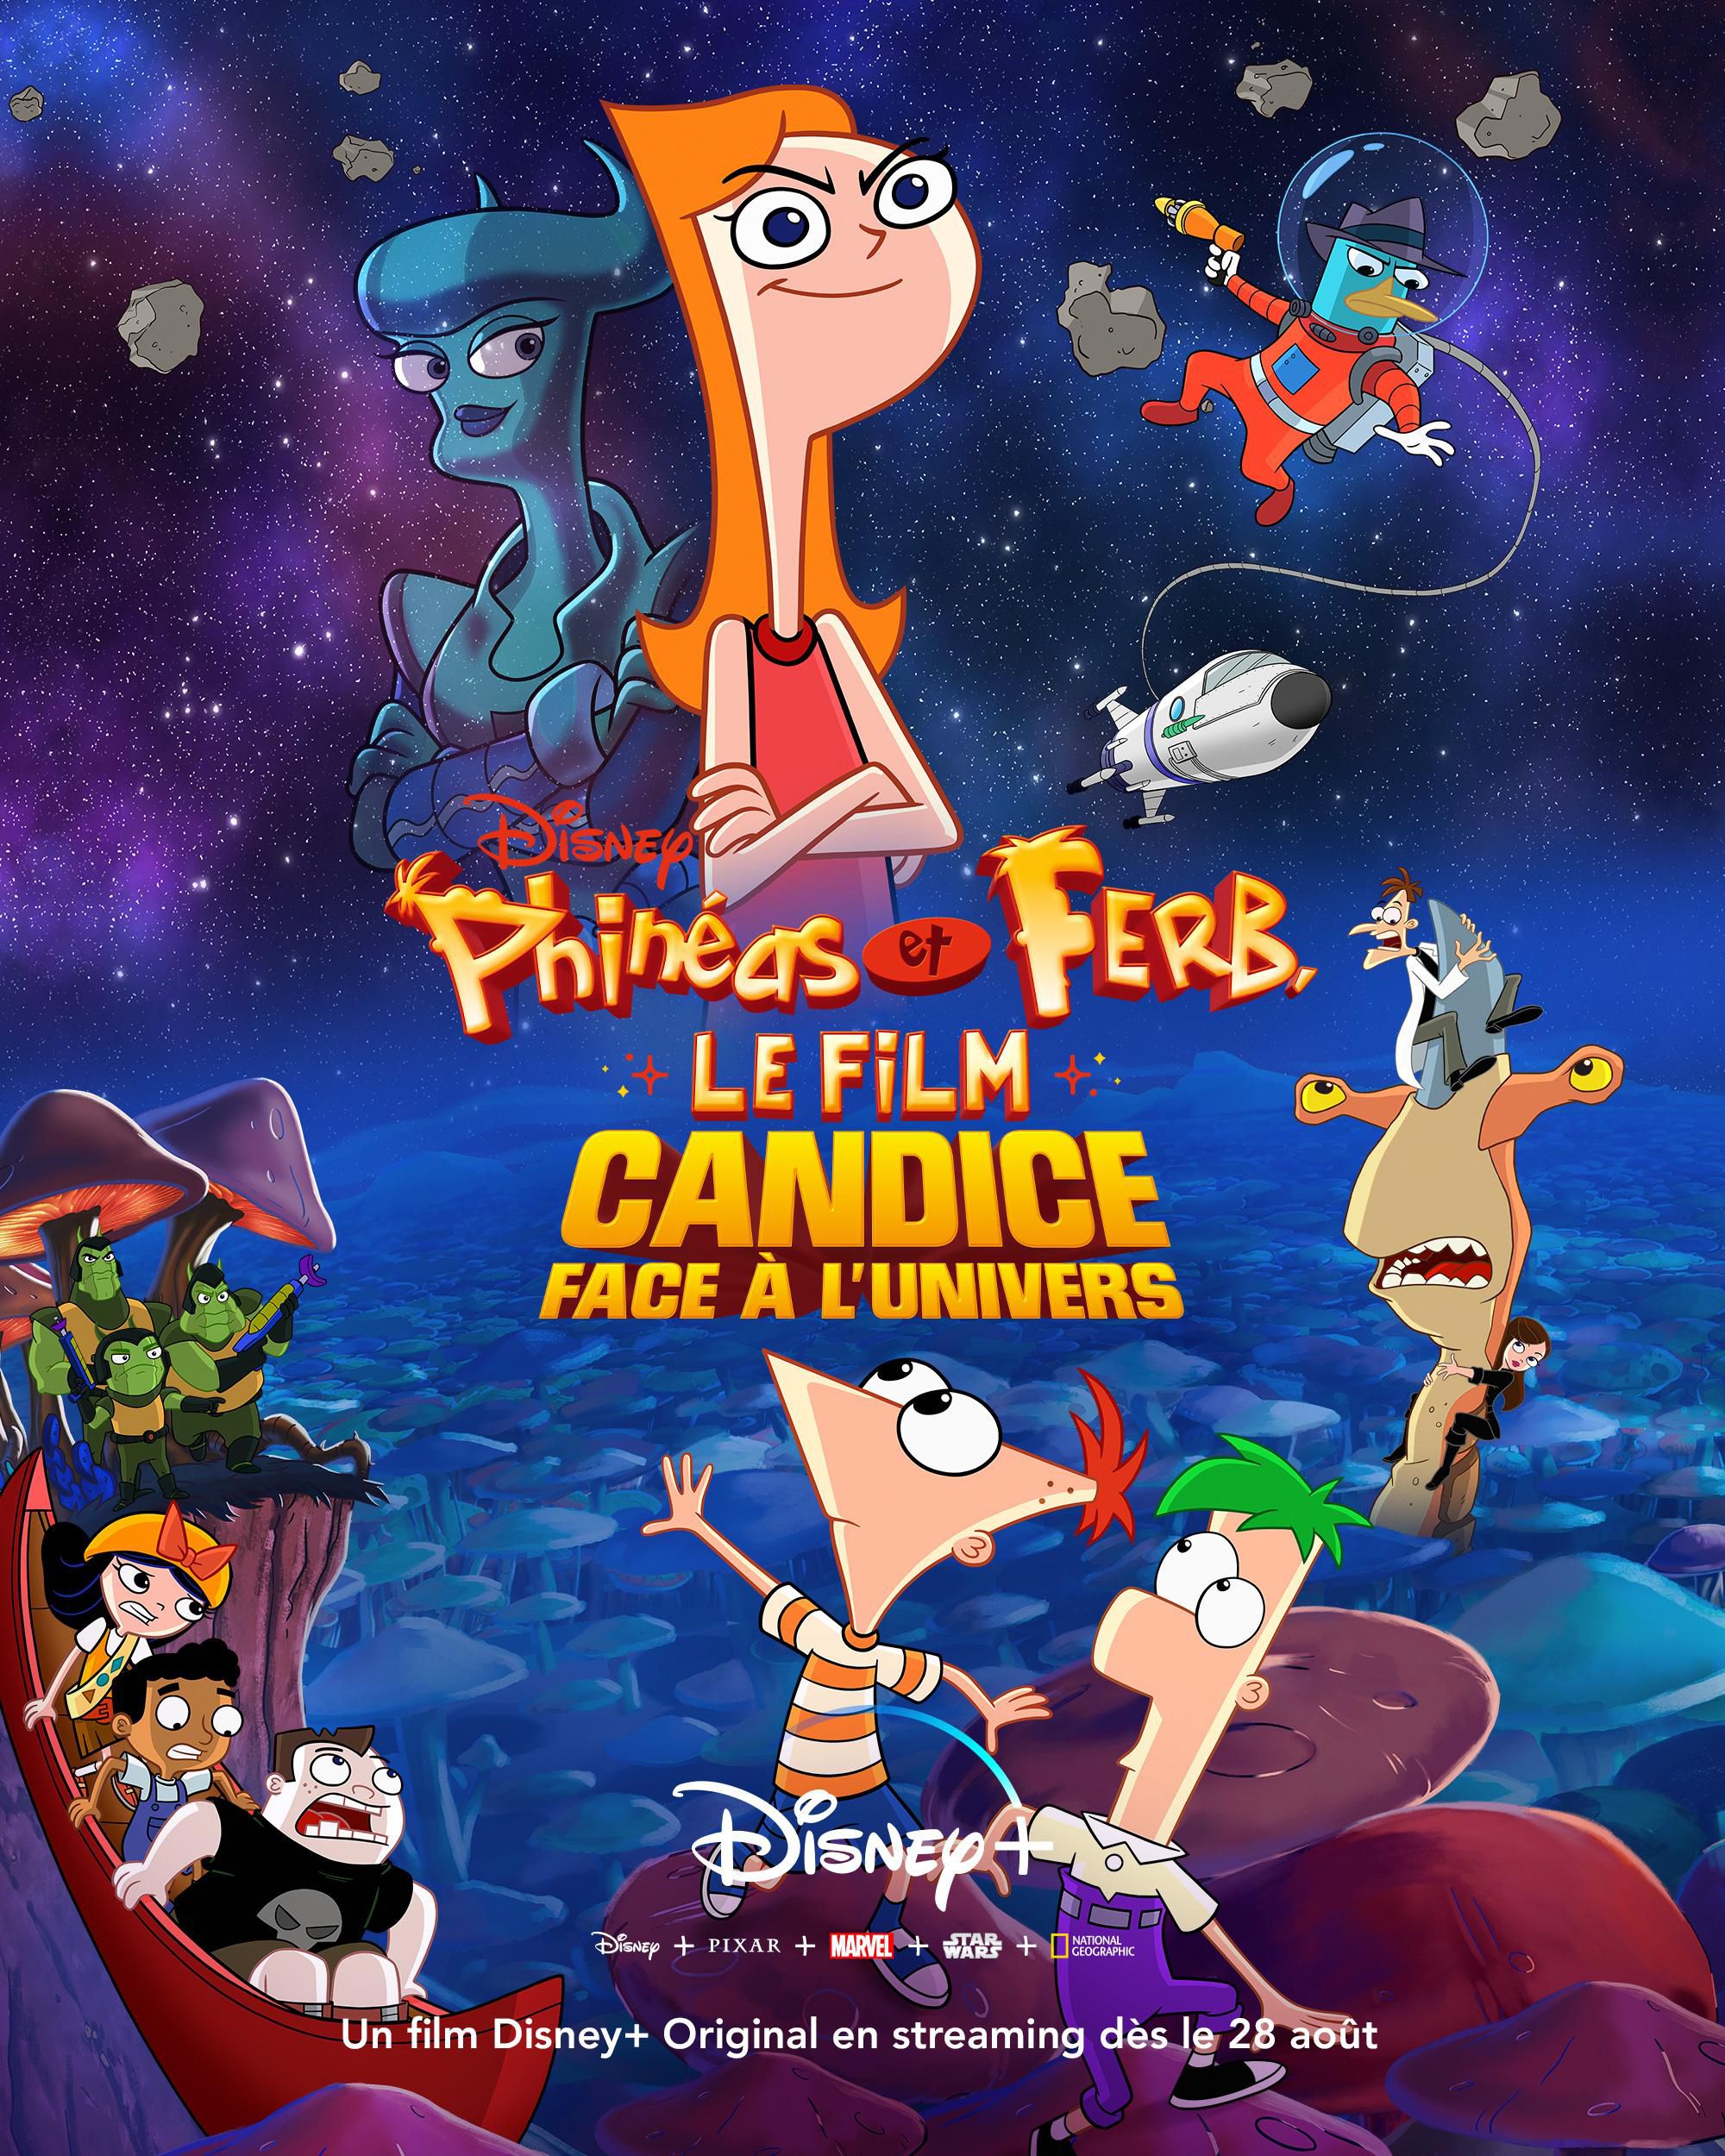 danny mark roberts recommends pictures of phineas and ferb pic